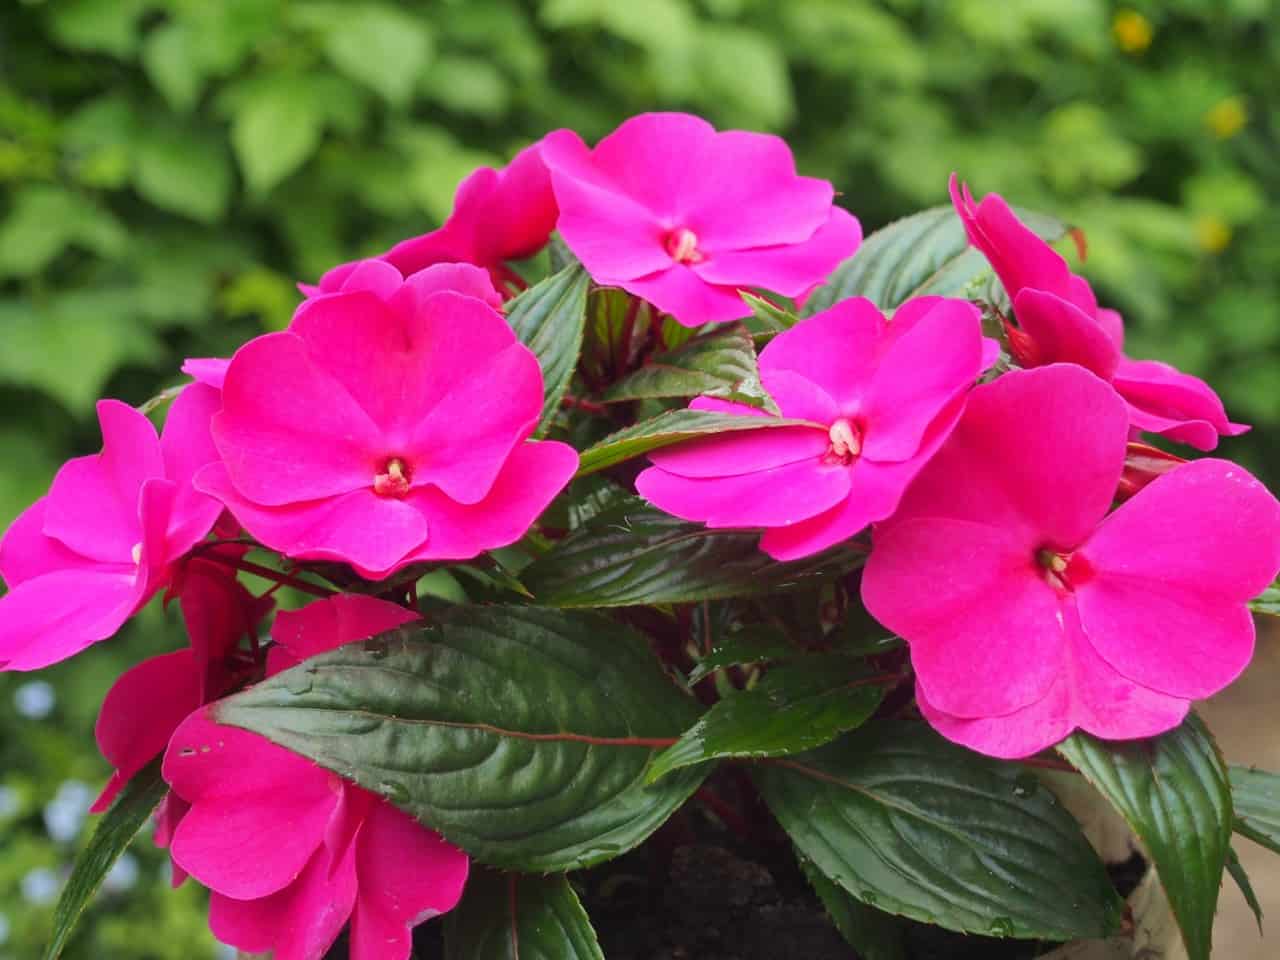 an easy to grow flower, impatiens needs shade to thrive